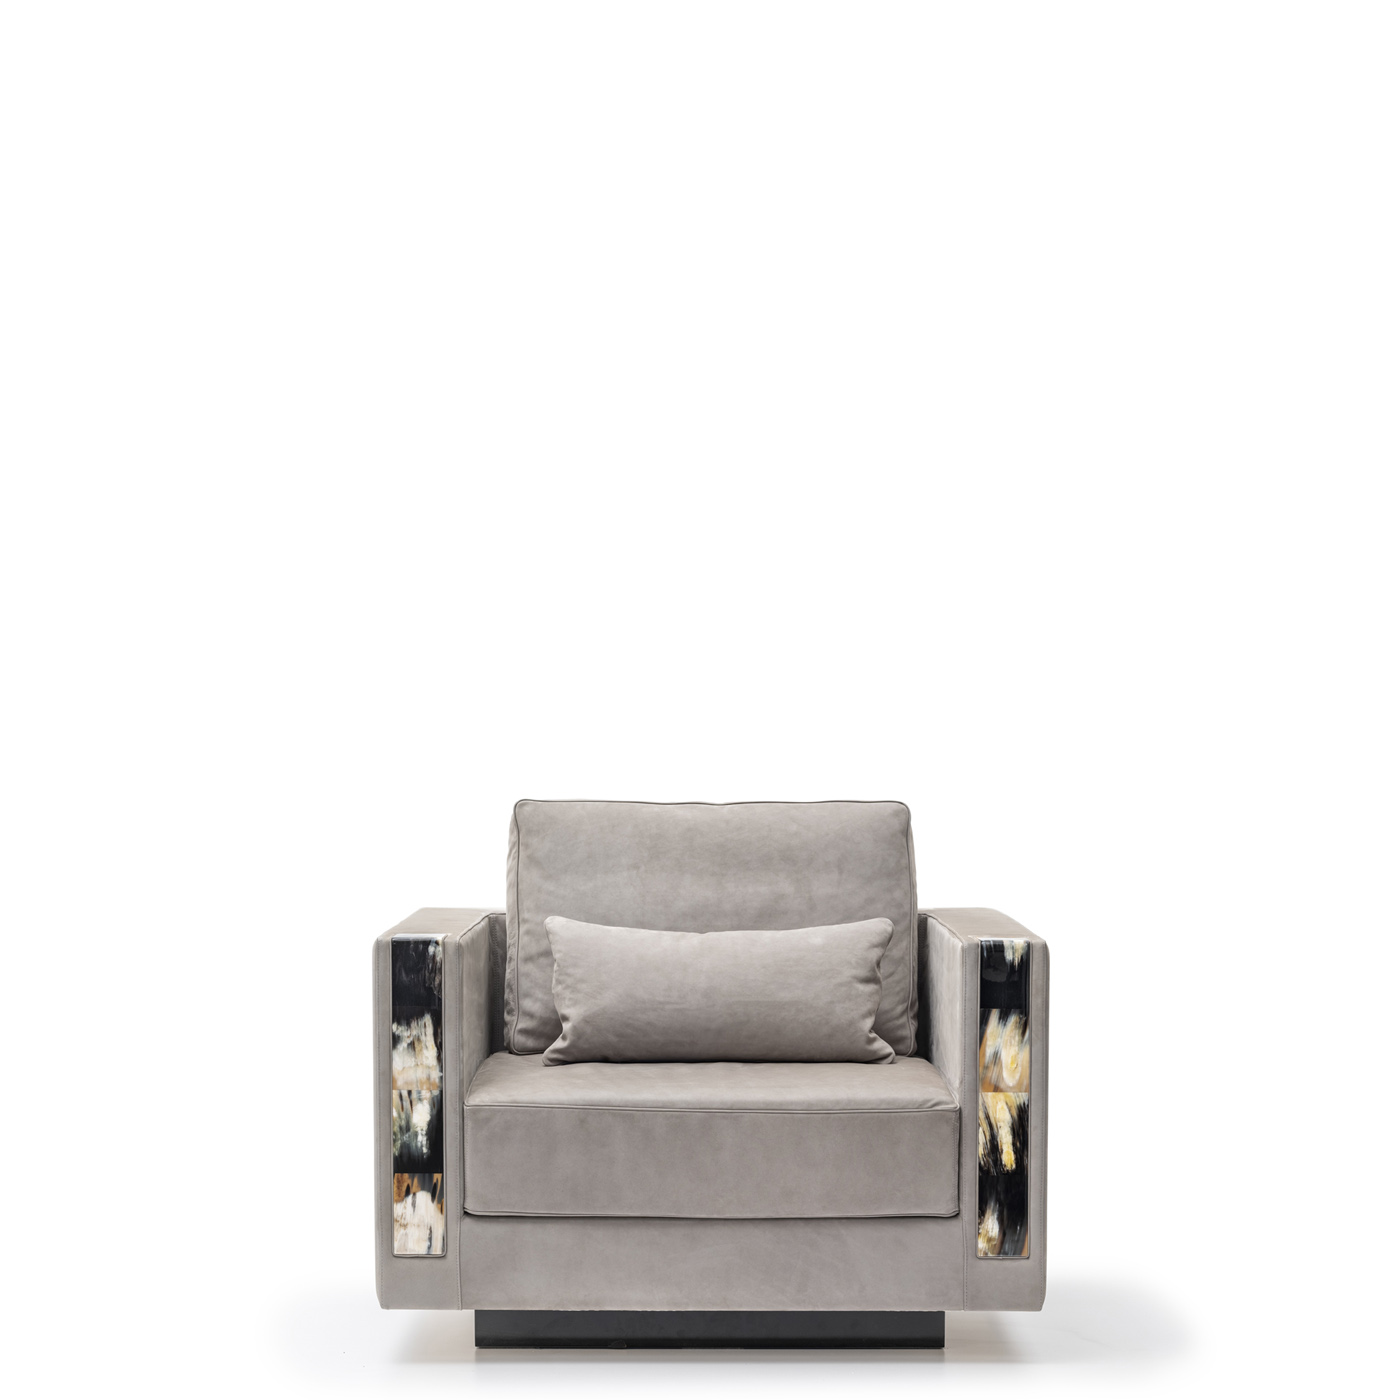 Sofas and seats - Zeus armchair in nabuk leather with armrests in horn - Arcahorn